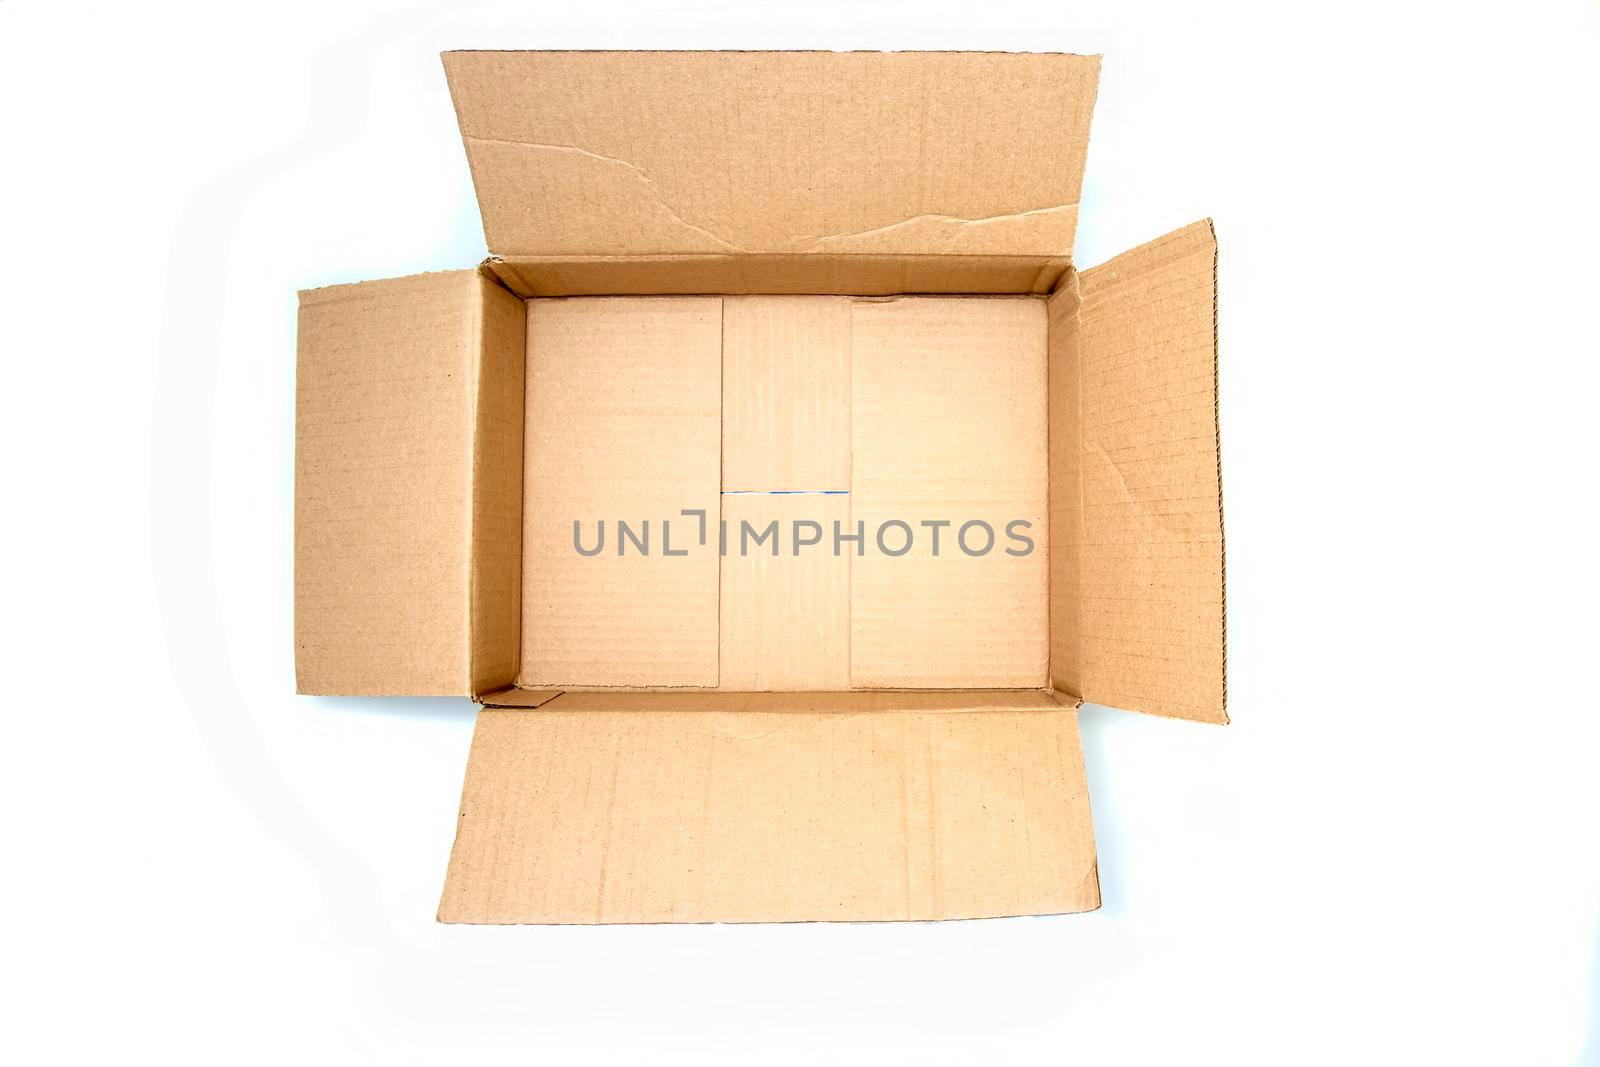 top view: open empty cardboard box with space for copy space. concept: moving, packaging, gift. isolated